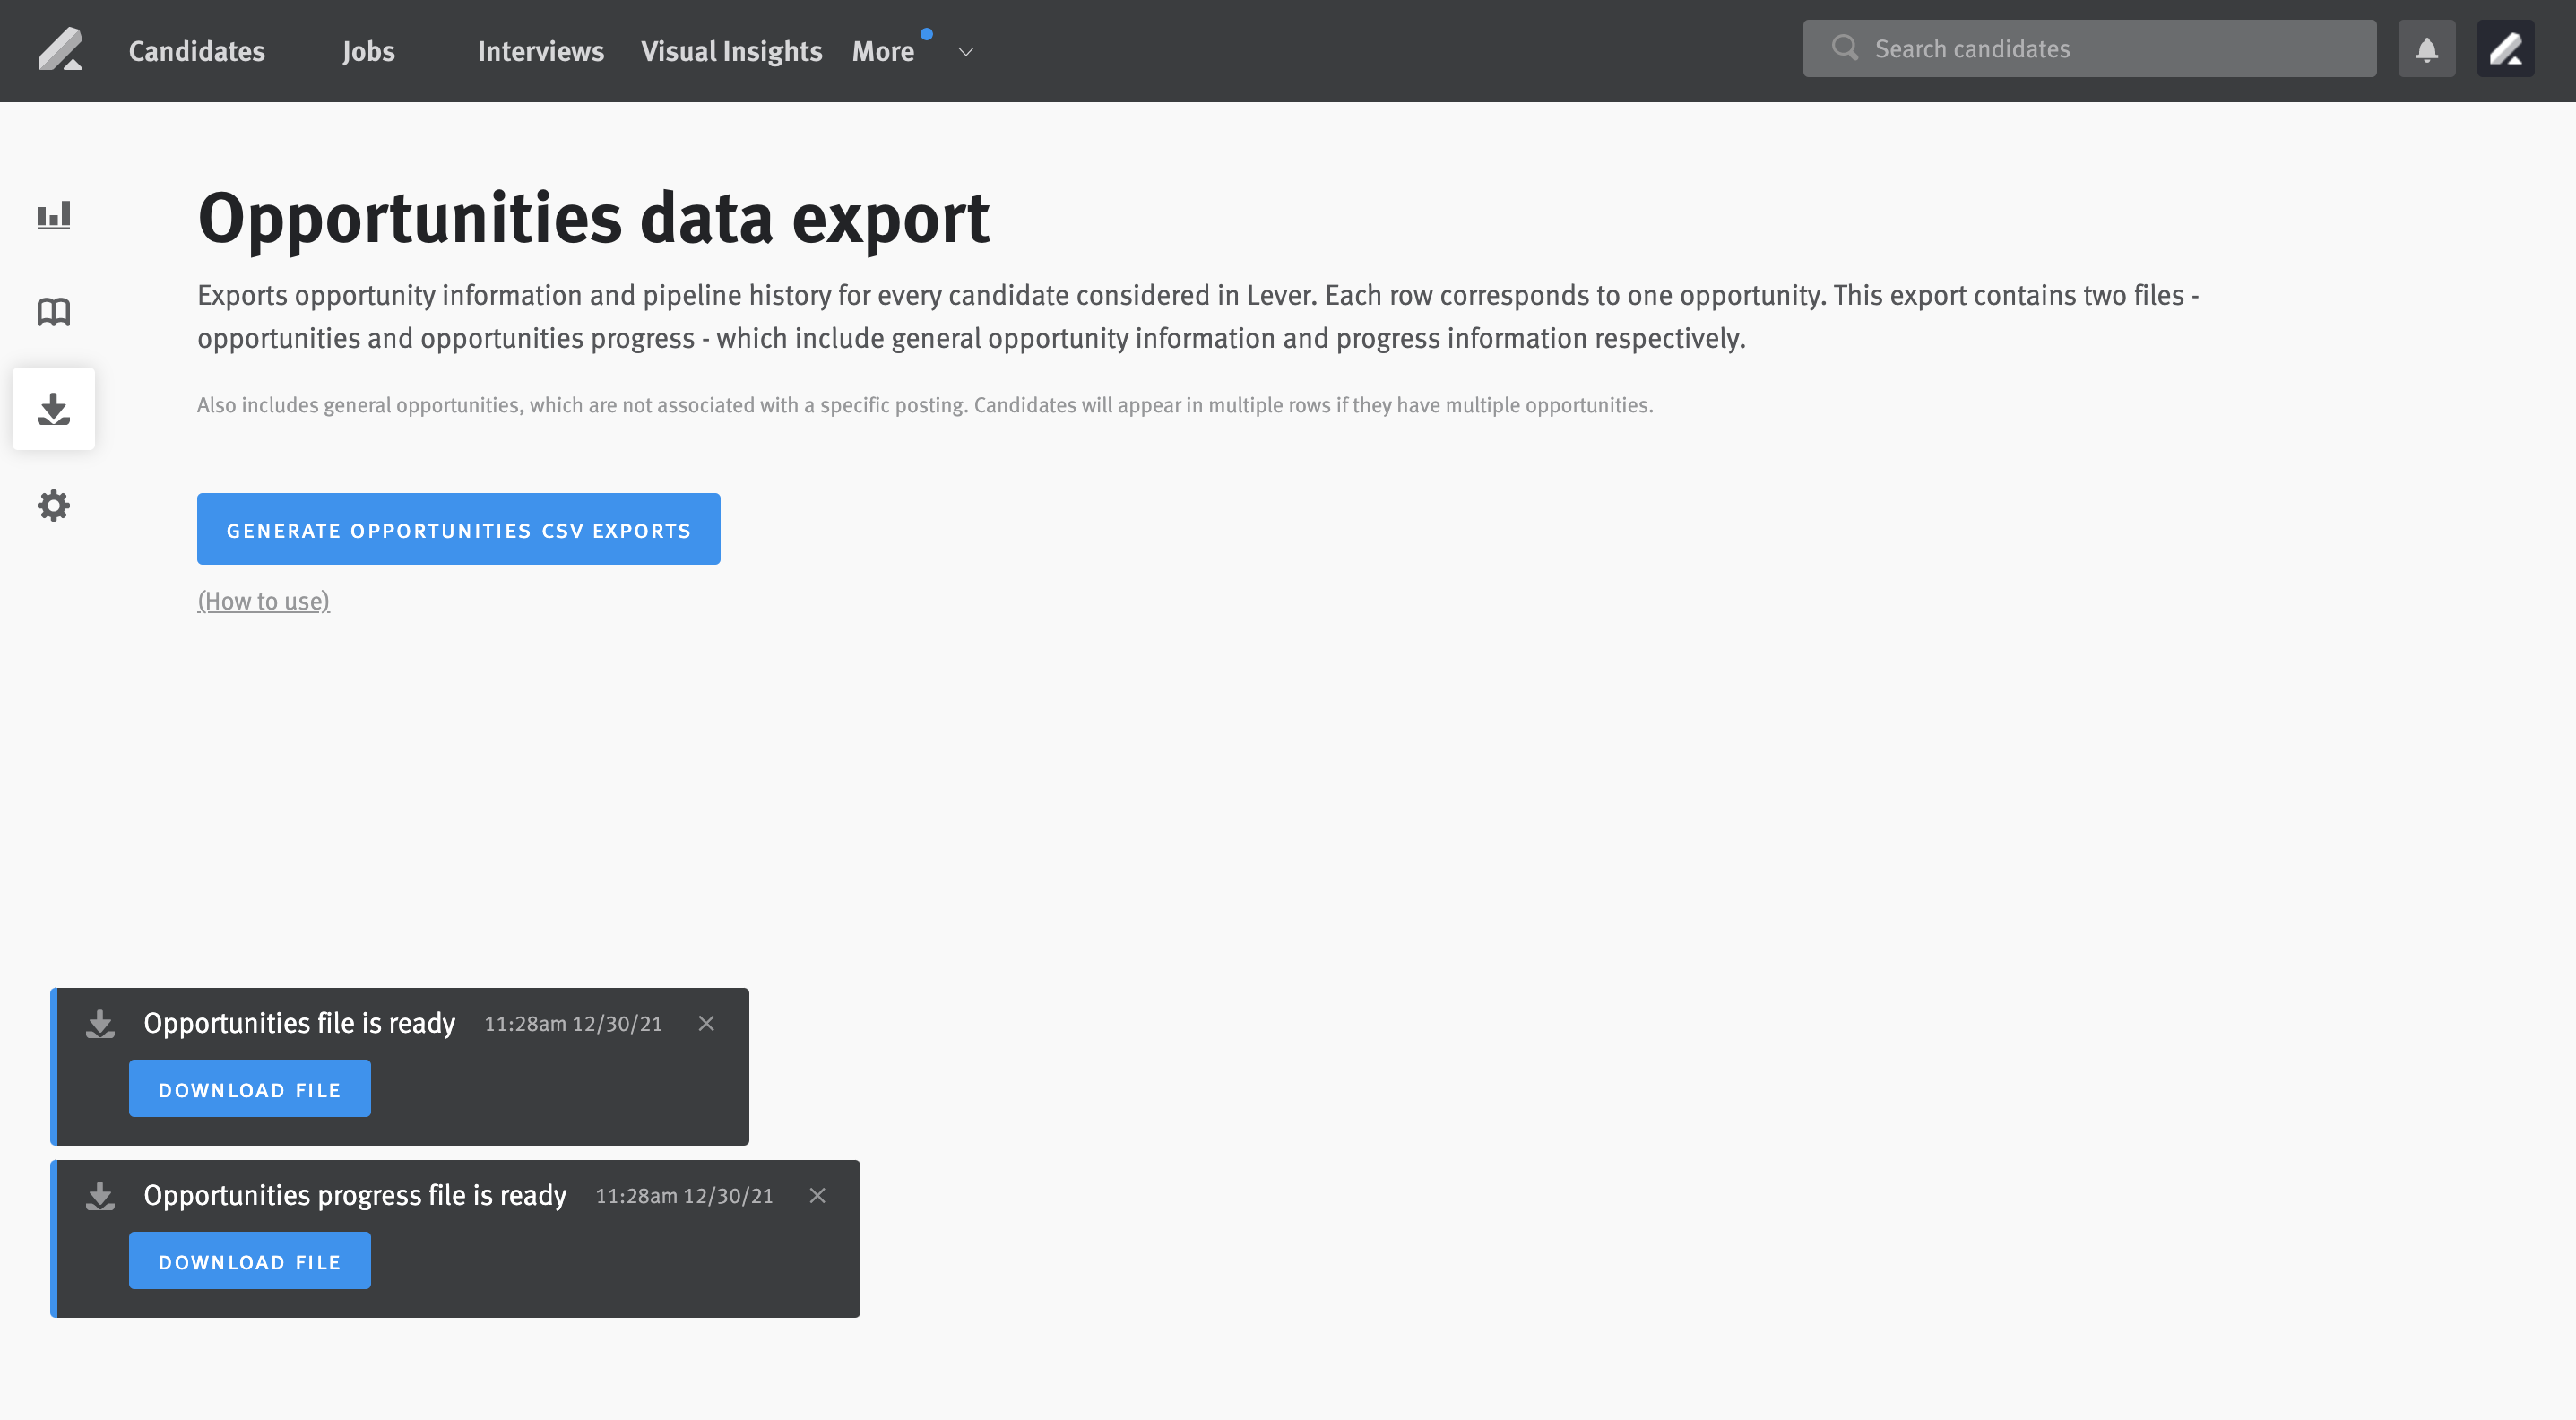 Opportunities export generator page with two pop-ups in lower-right corner of screen indicating that exports are ready for download.